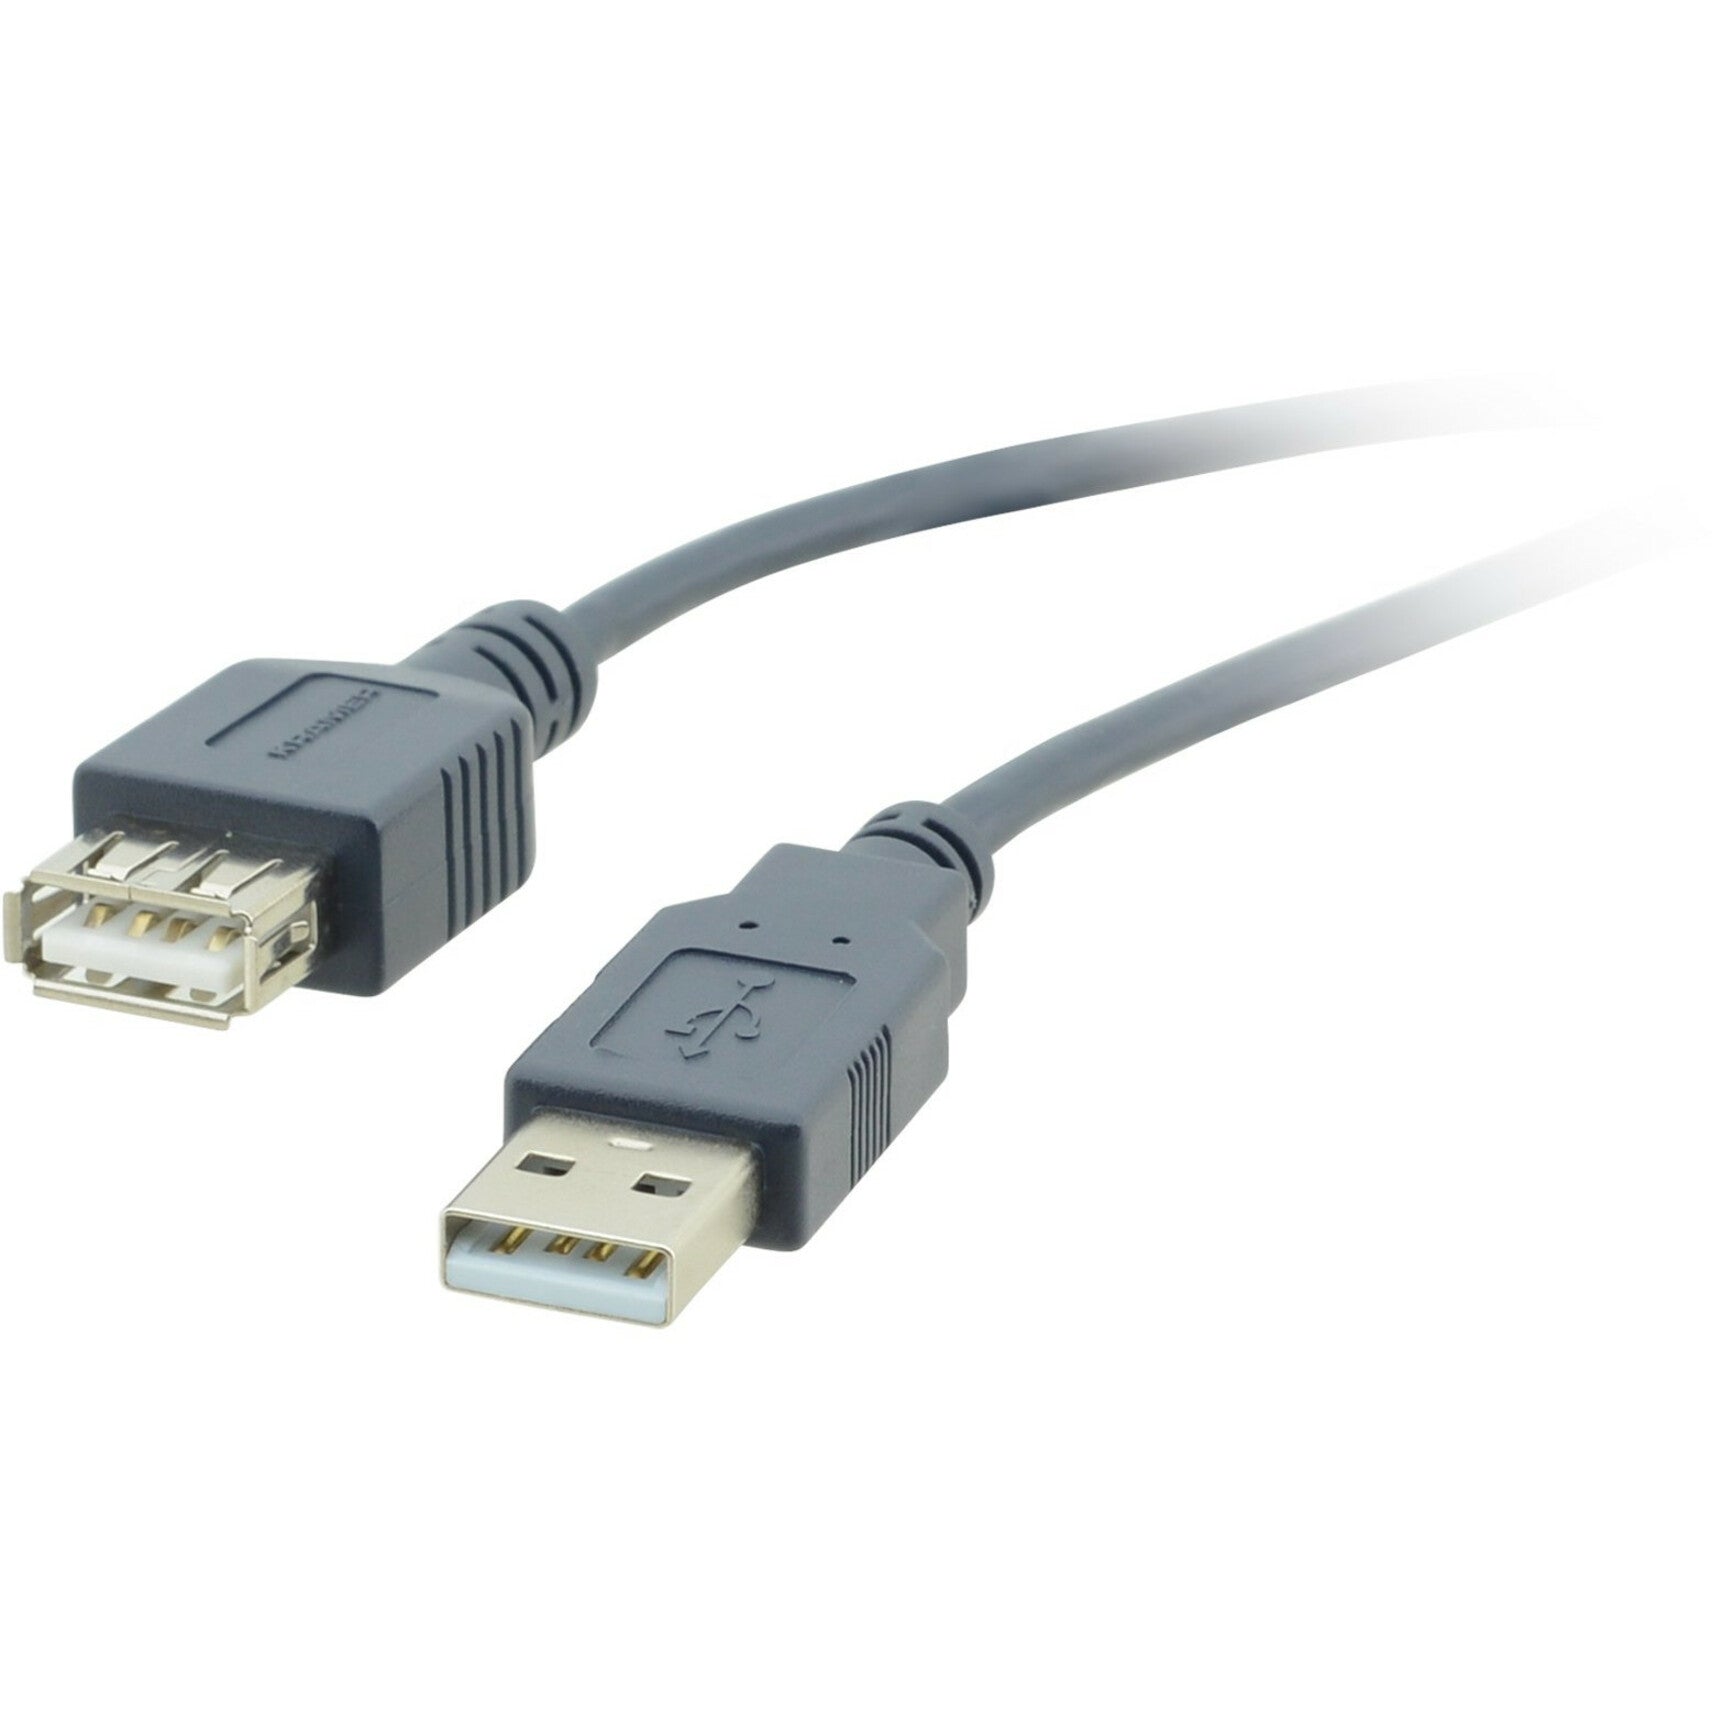 Kramer 96-02121010 USB 2.0 A (M) to A (F) Extension Cable, 10 ft, Strain Relief, EMI/RF Protection